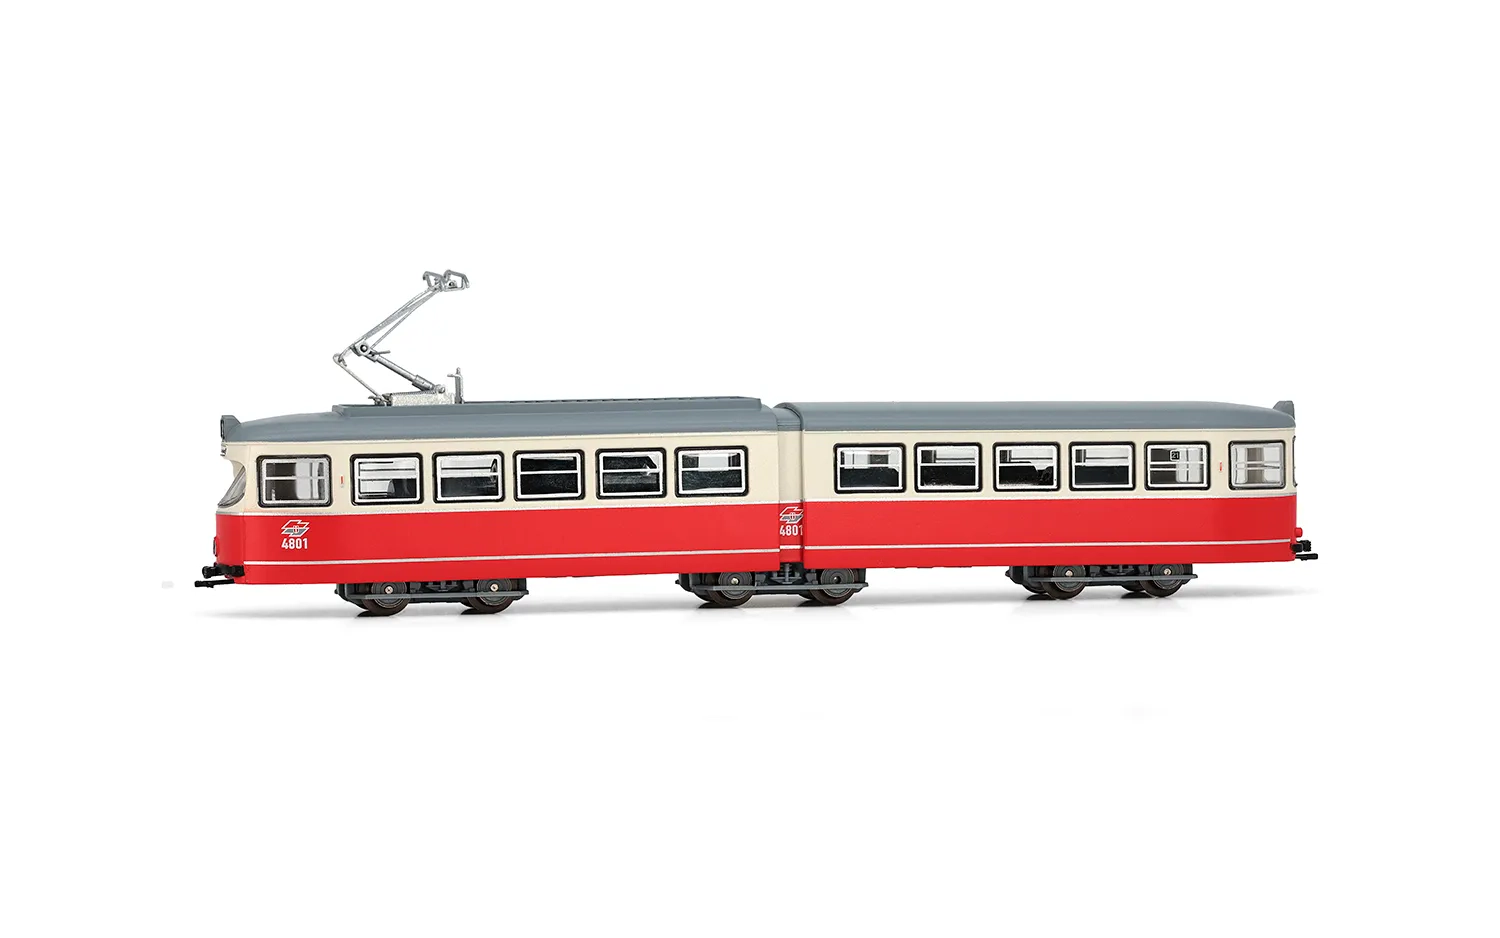 Tram Duewag GT6, one front light, red/white livery "Wien", ep. IV-V